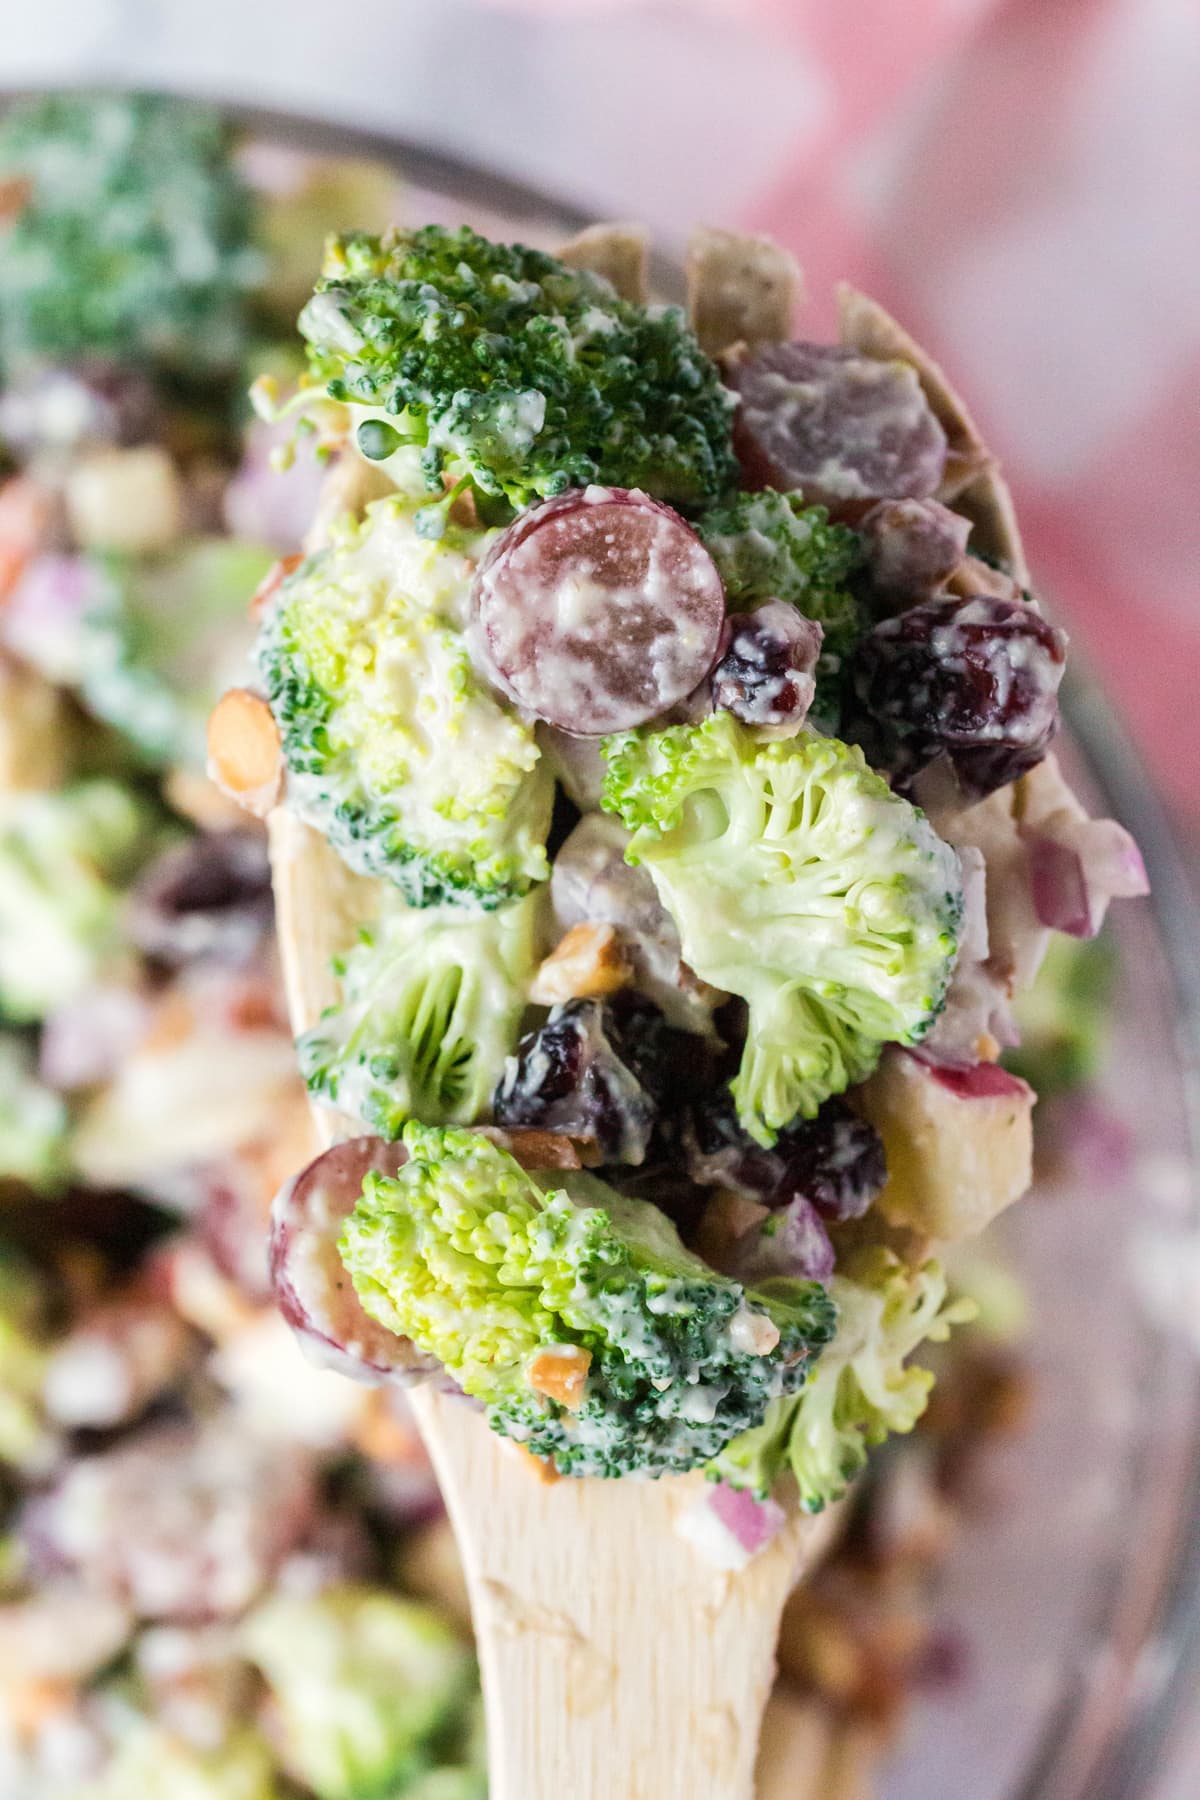 A close up of healthy broccoli salad on a wooden spoon